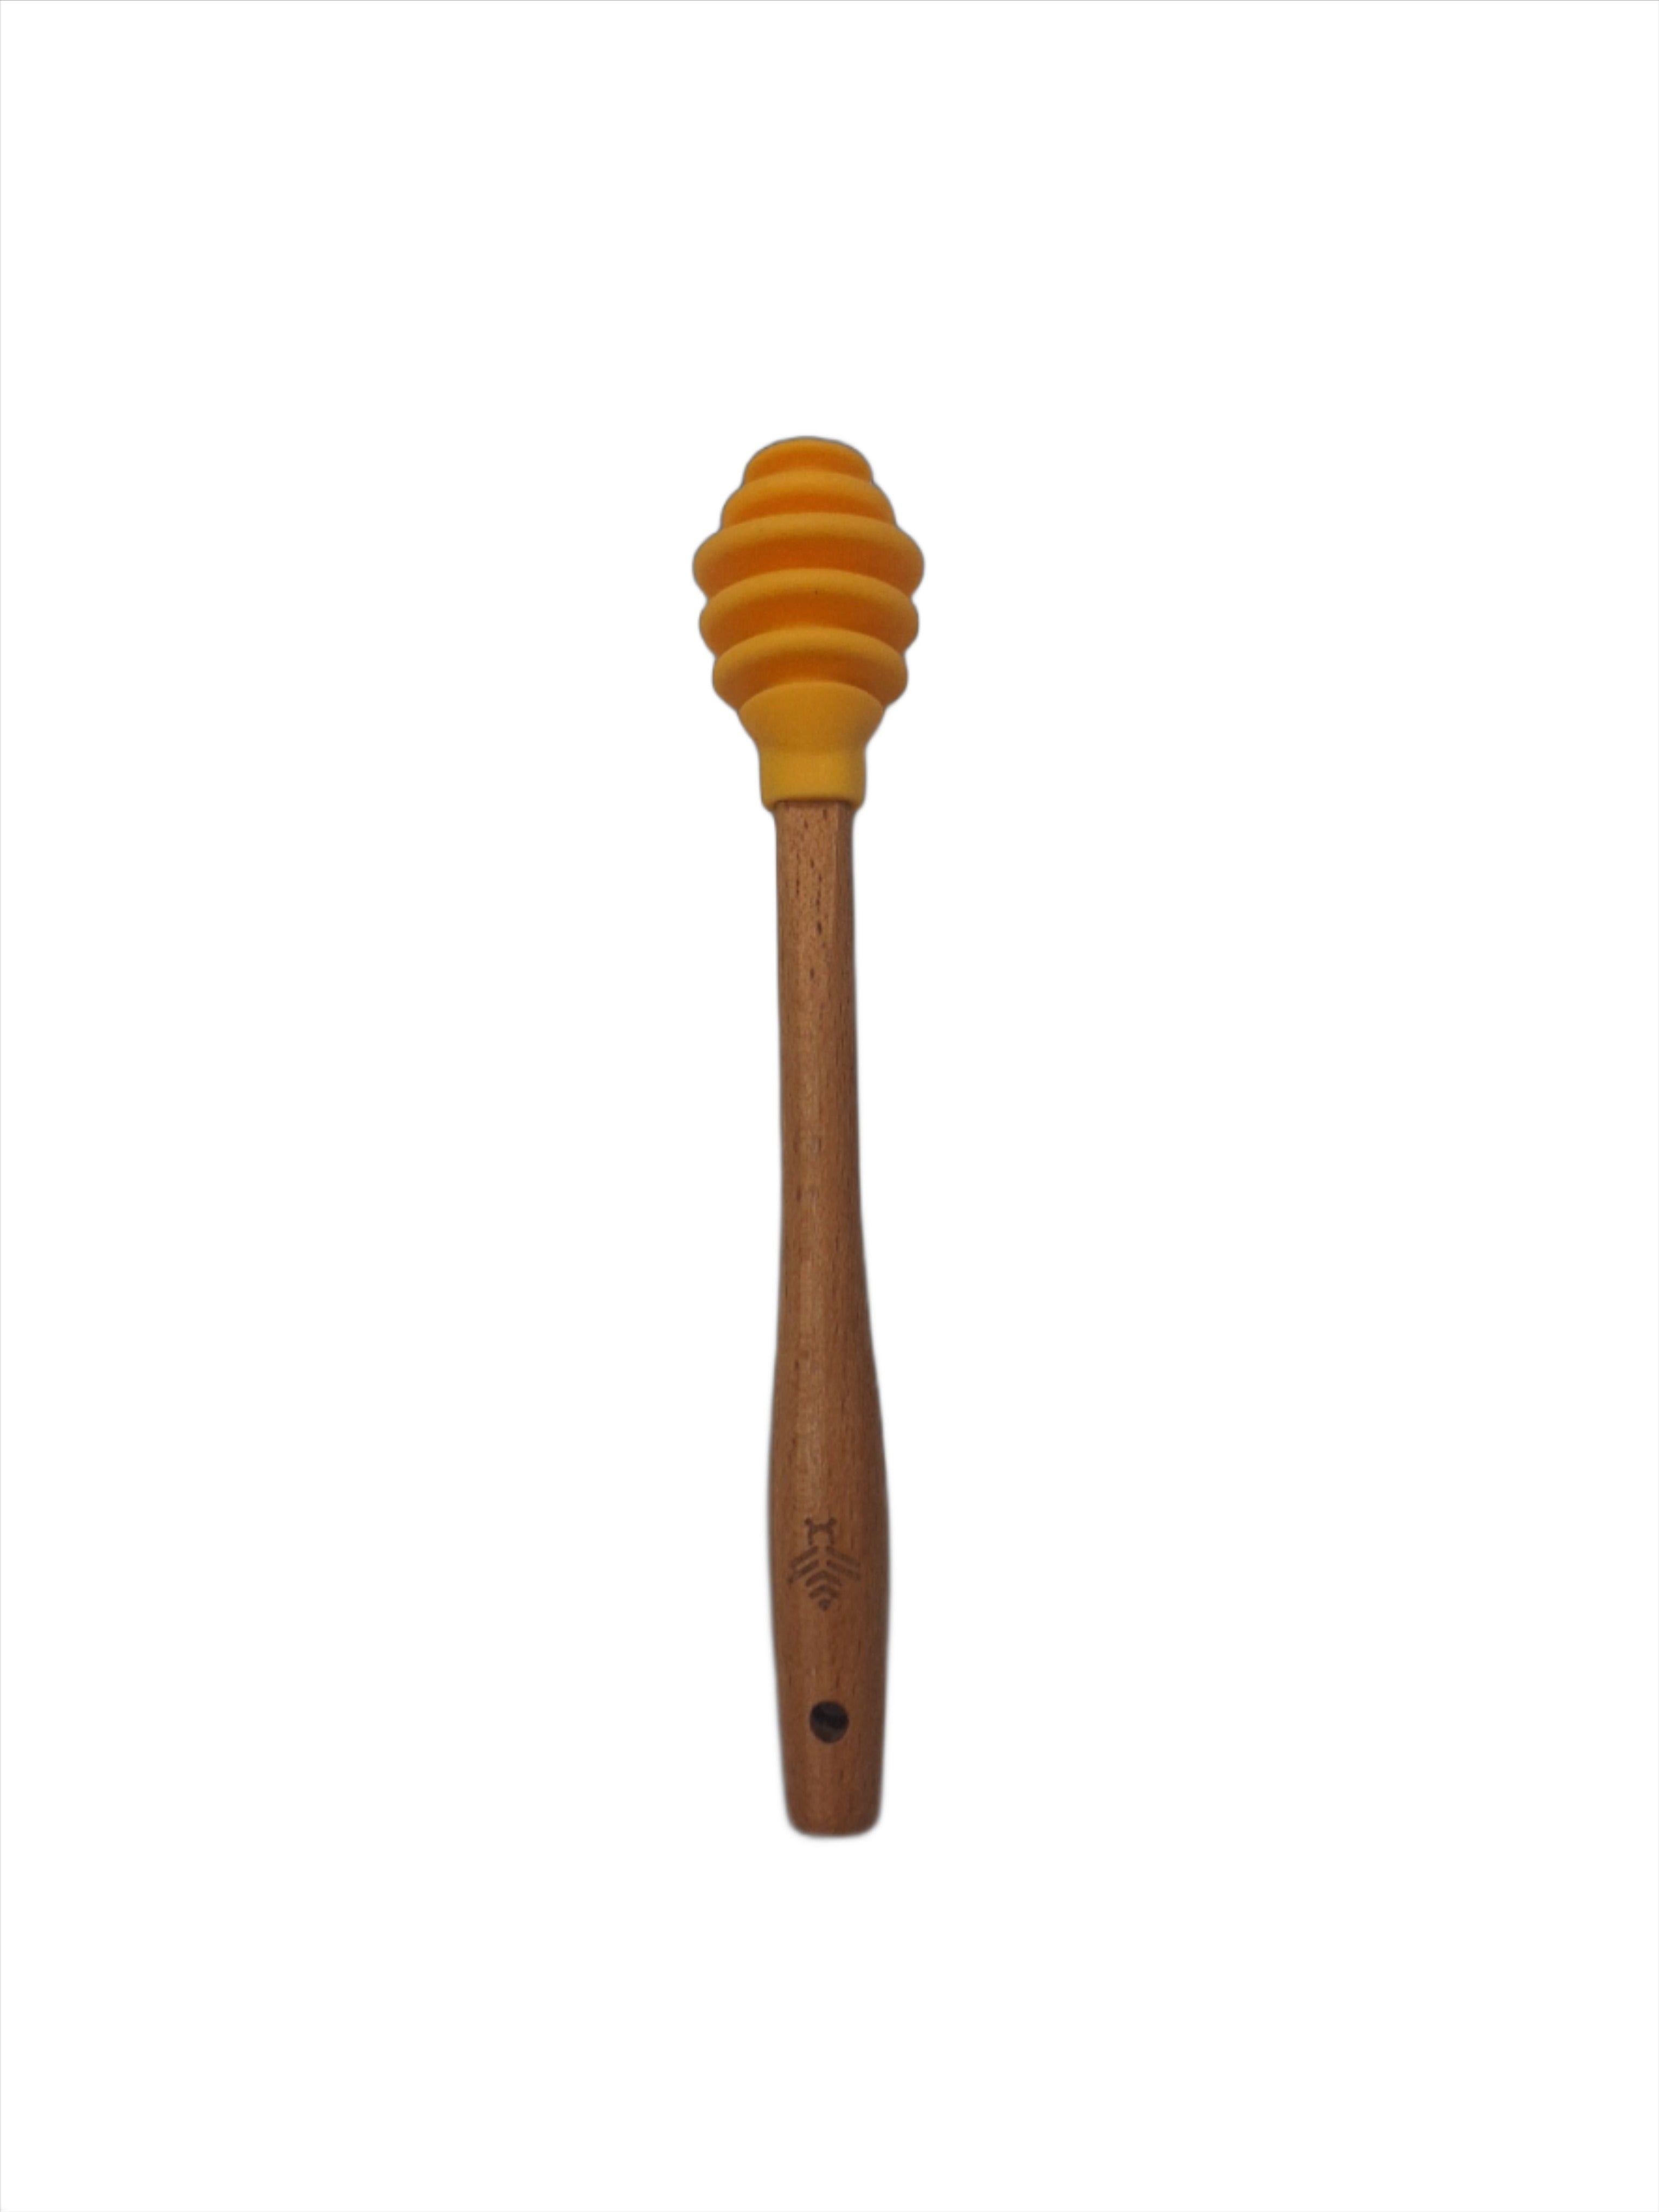 TBS Silicone Tipped Honey Dipper